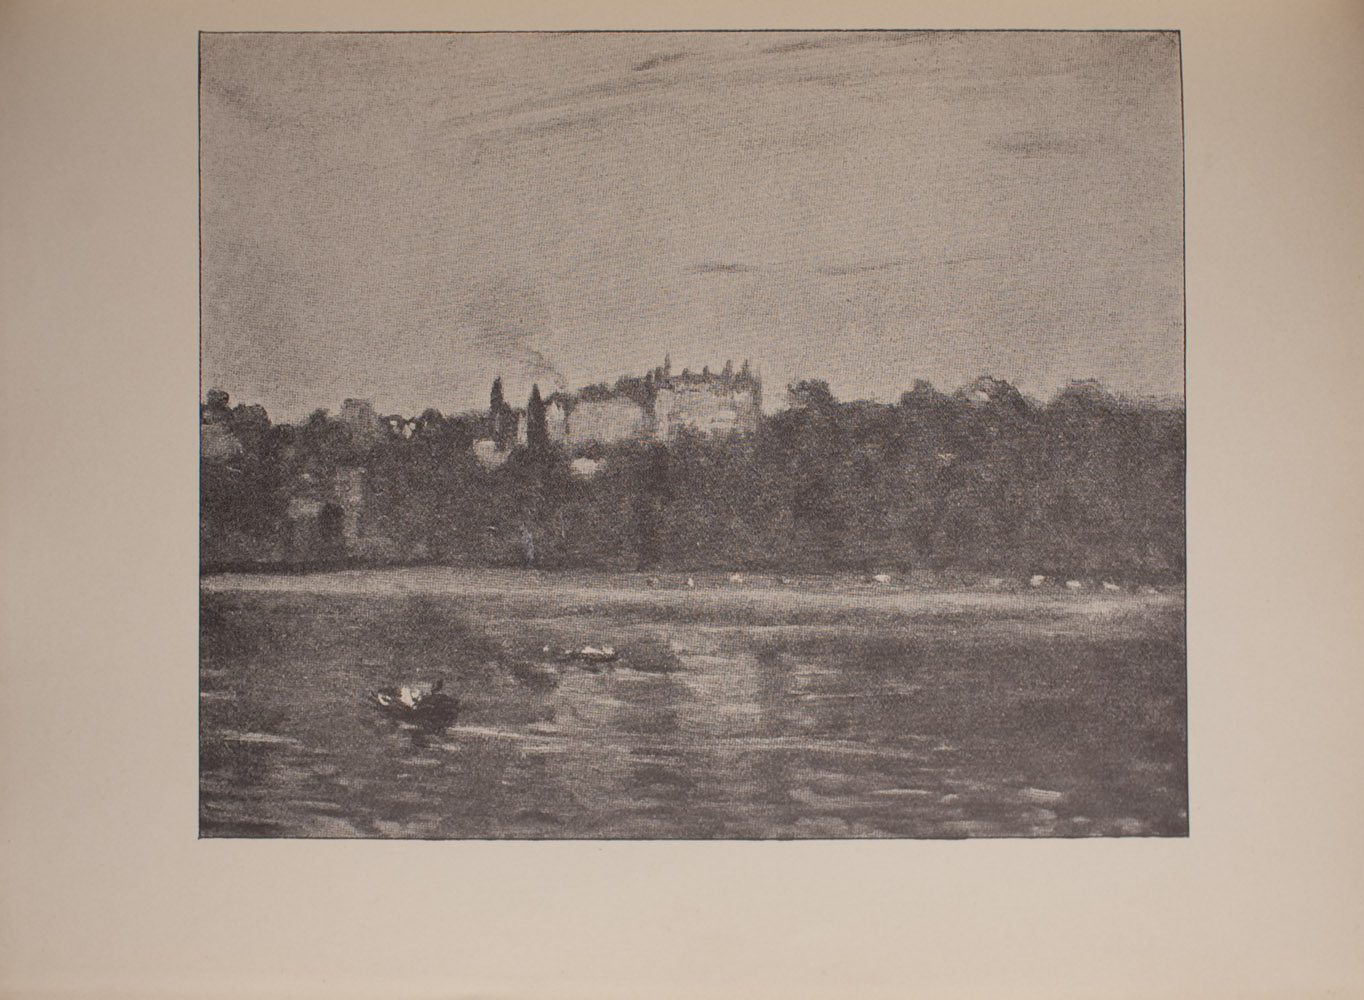 The image is of a waterside scene In the foreground there is a large body of water with two boats on the left side of the image In the middle ground there is a shoreline with many trees Beyond the forest of trees is a large building with smoke rising from the chimney The reflection of the landscape can be seen in the water The image horizontally displayed